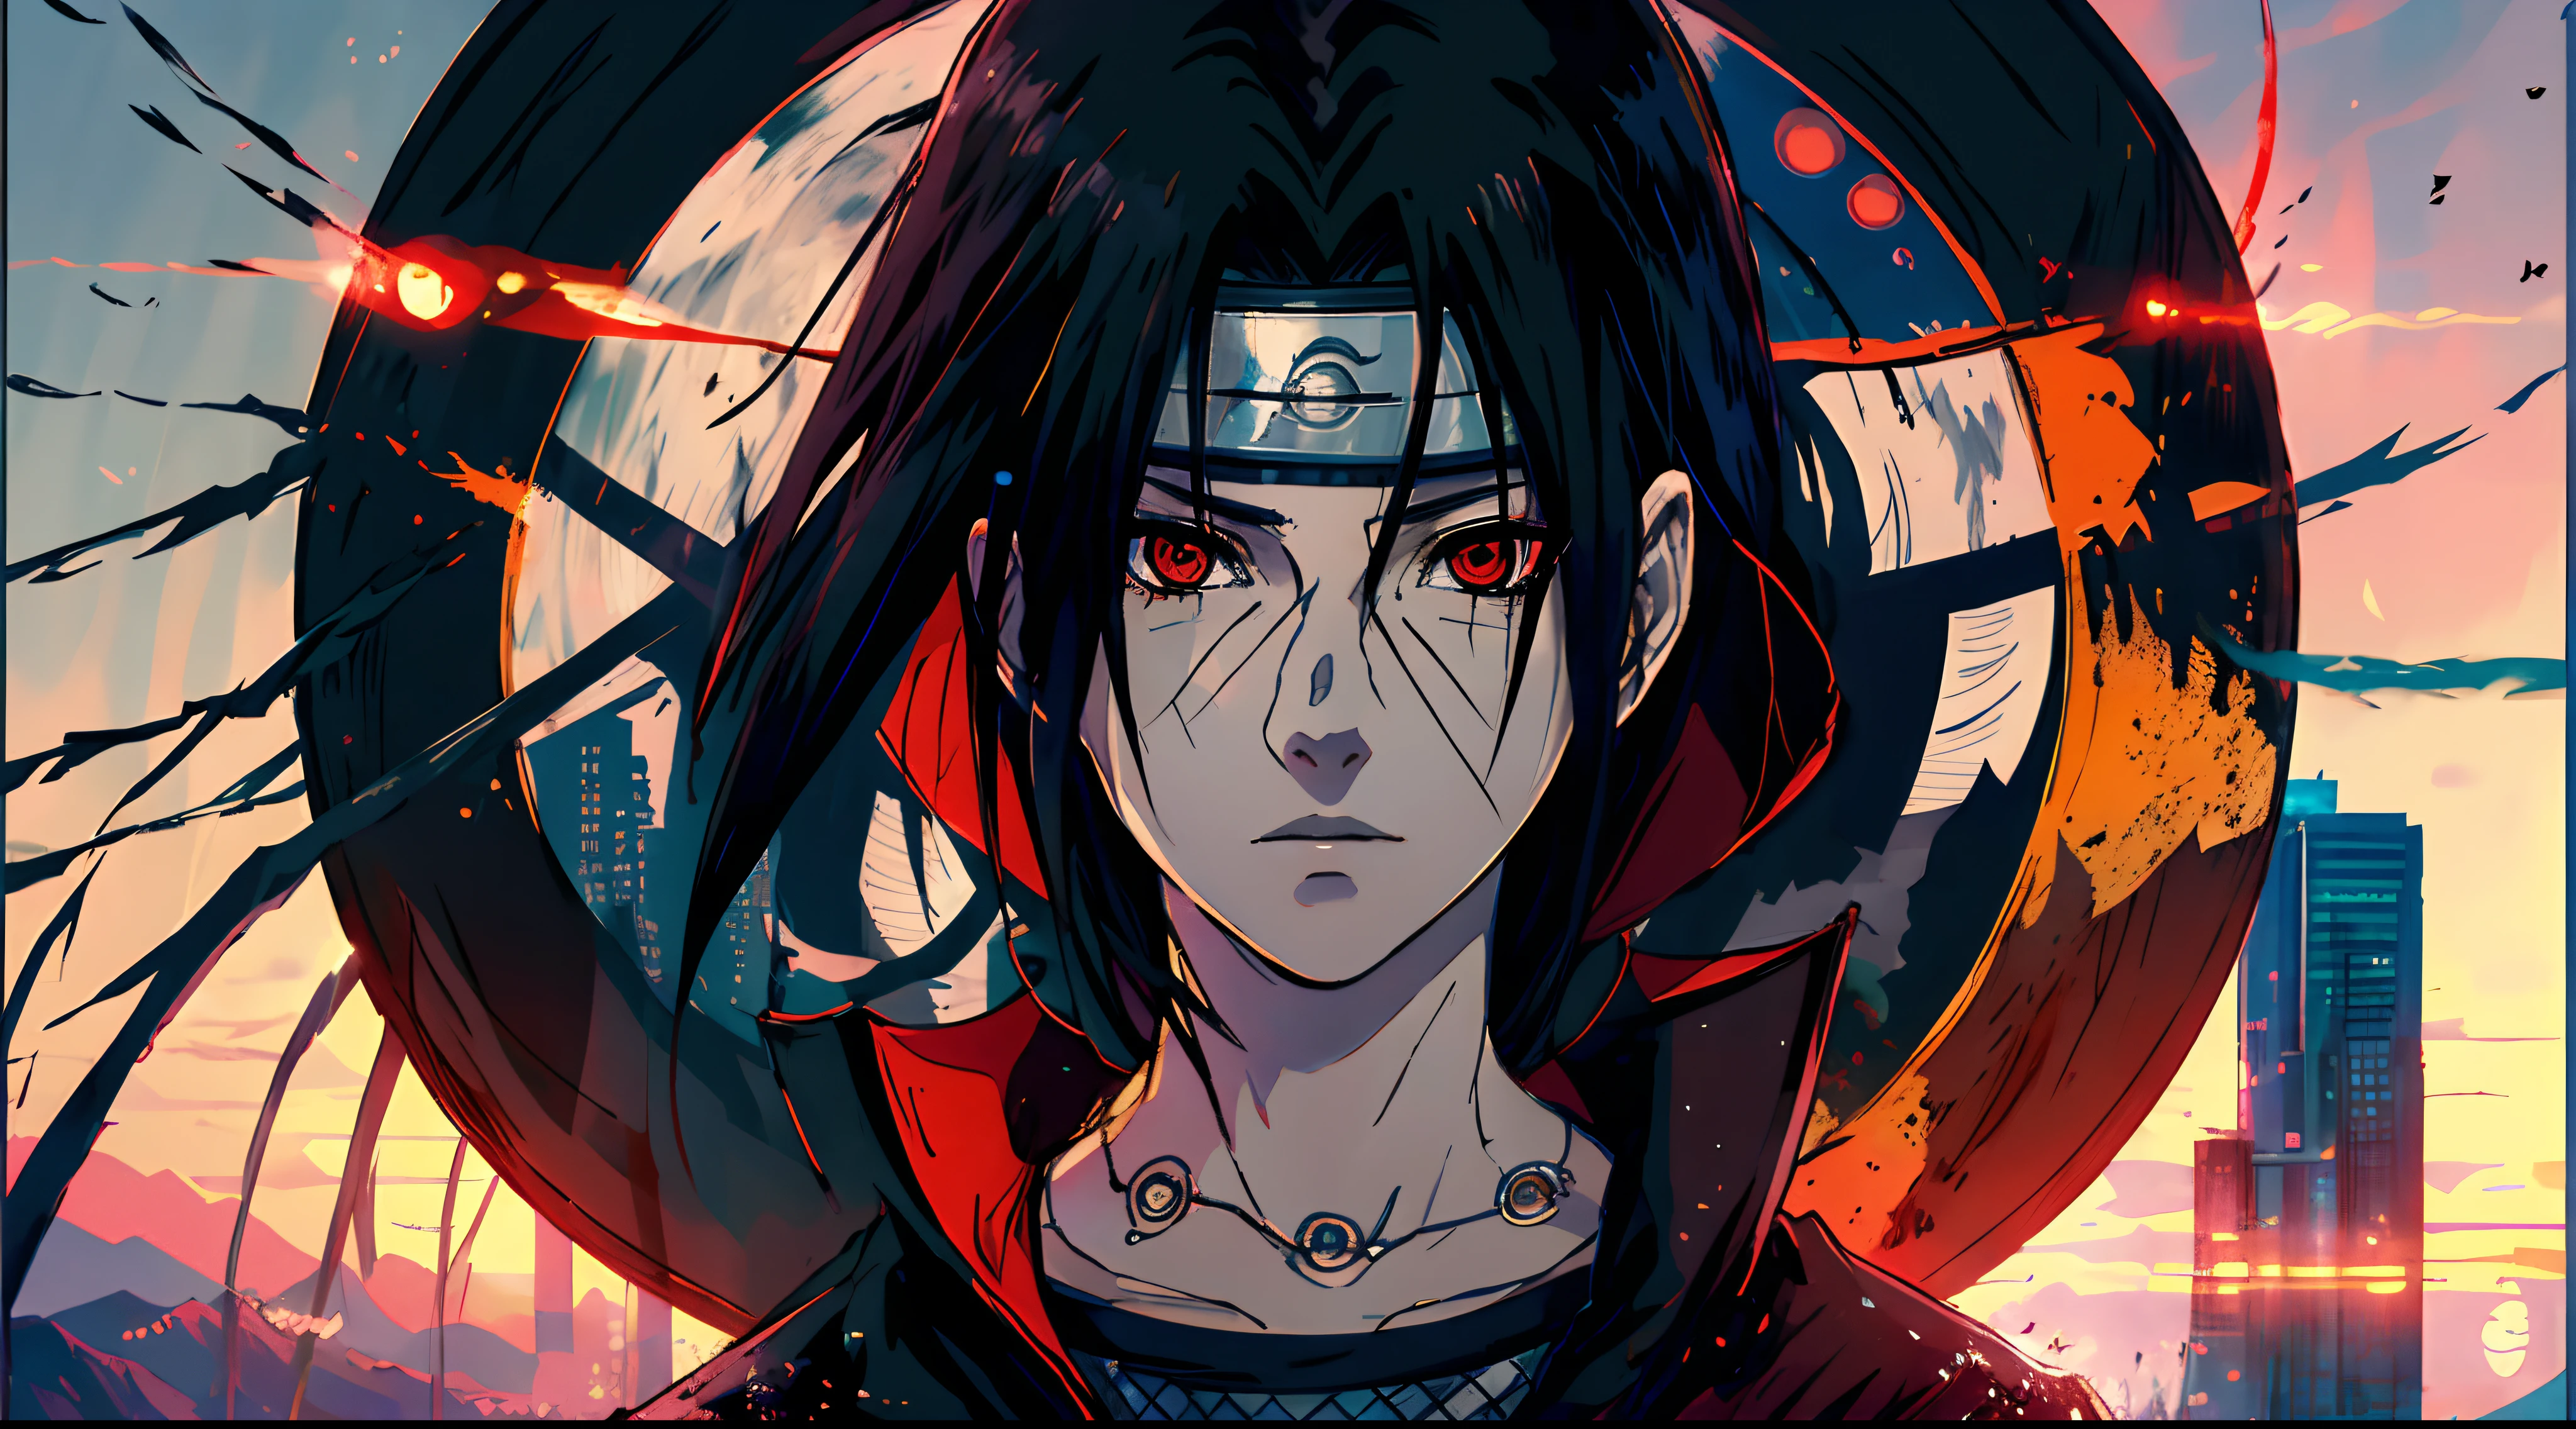 uchiha itachi passed through a portal, soft shades, calm colors, (realisitic), detailded, Masterpiece artwork, 8K, best qualityer, detailded